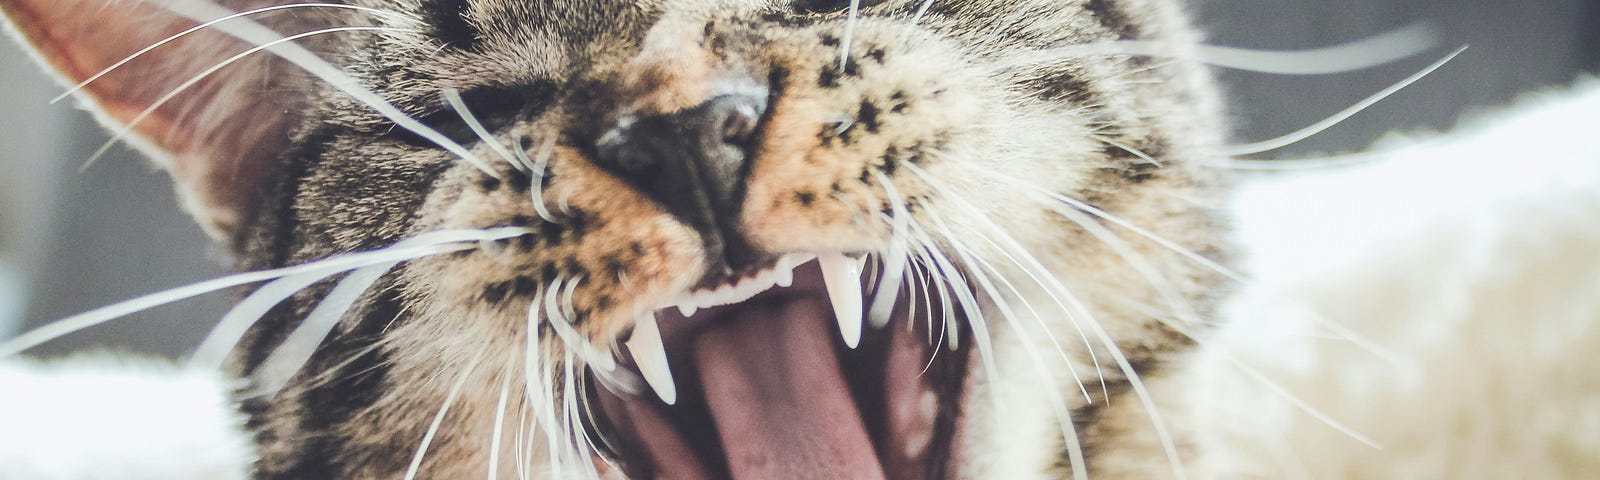 A cat who has his mouth wide opened.